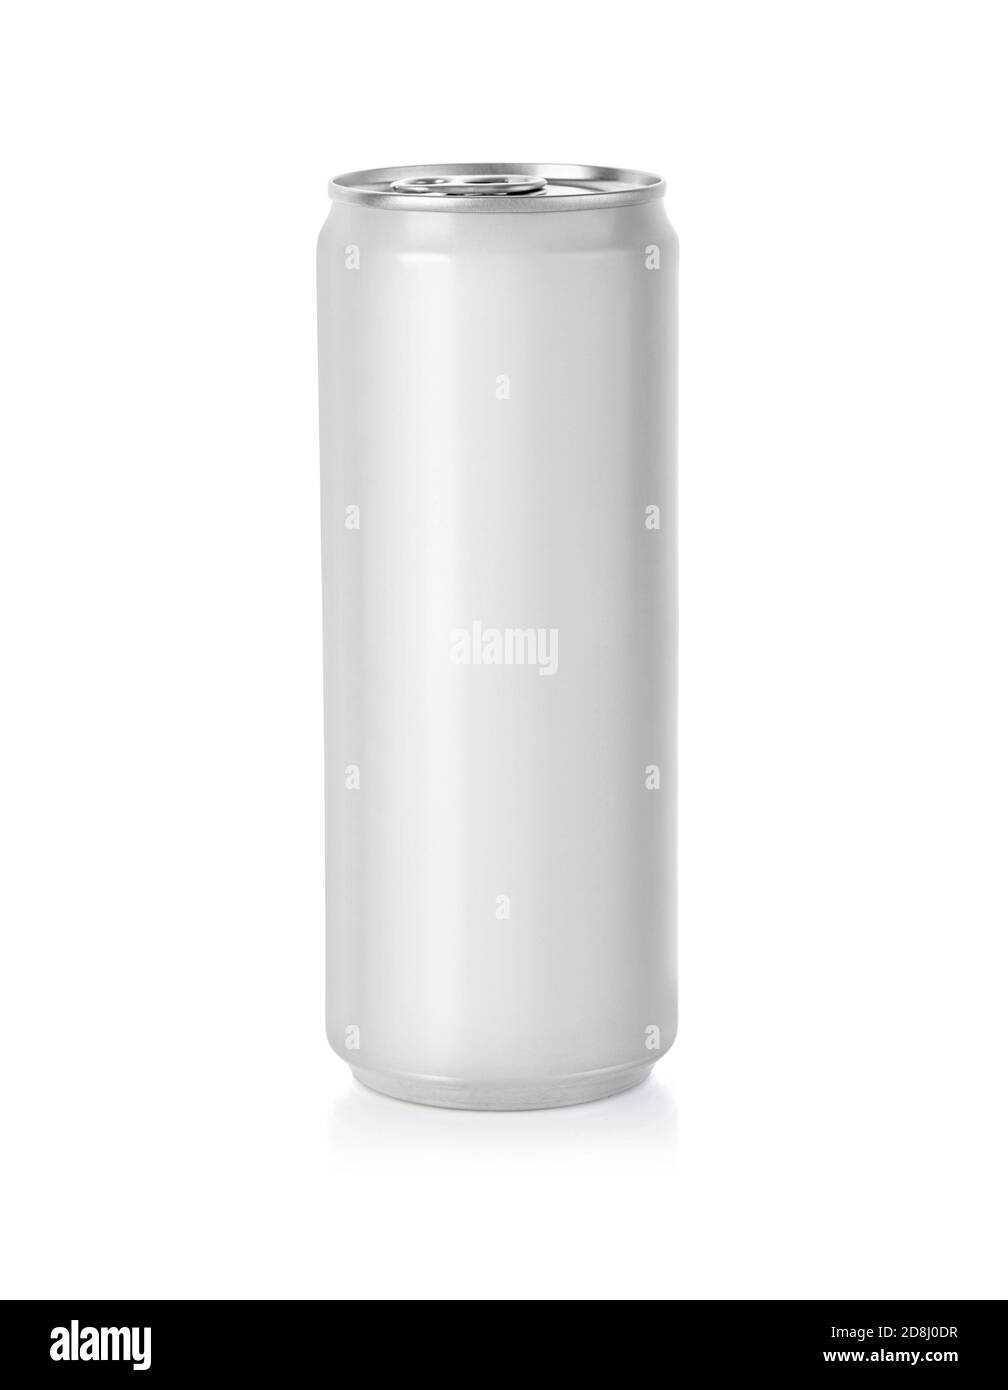 Download White Metal Aluminum Beverage Drink Can 500ml Mockup Template Ready For Your Design Isolated On White Background Clipping Path Stock Photo Alamy